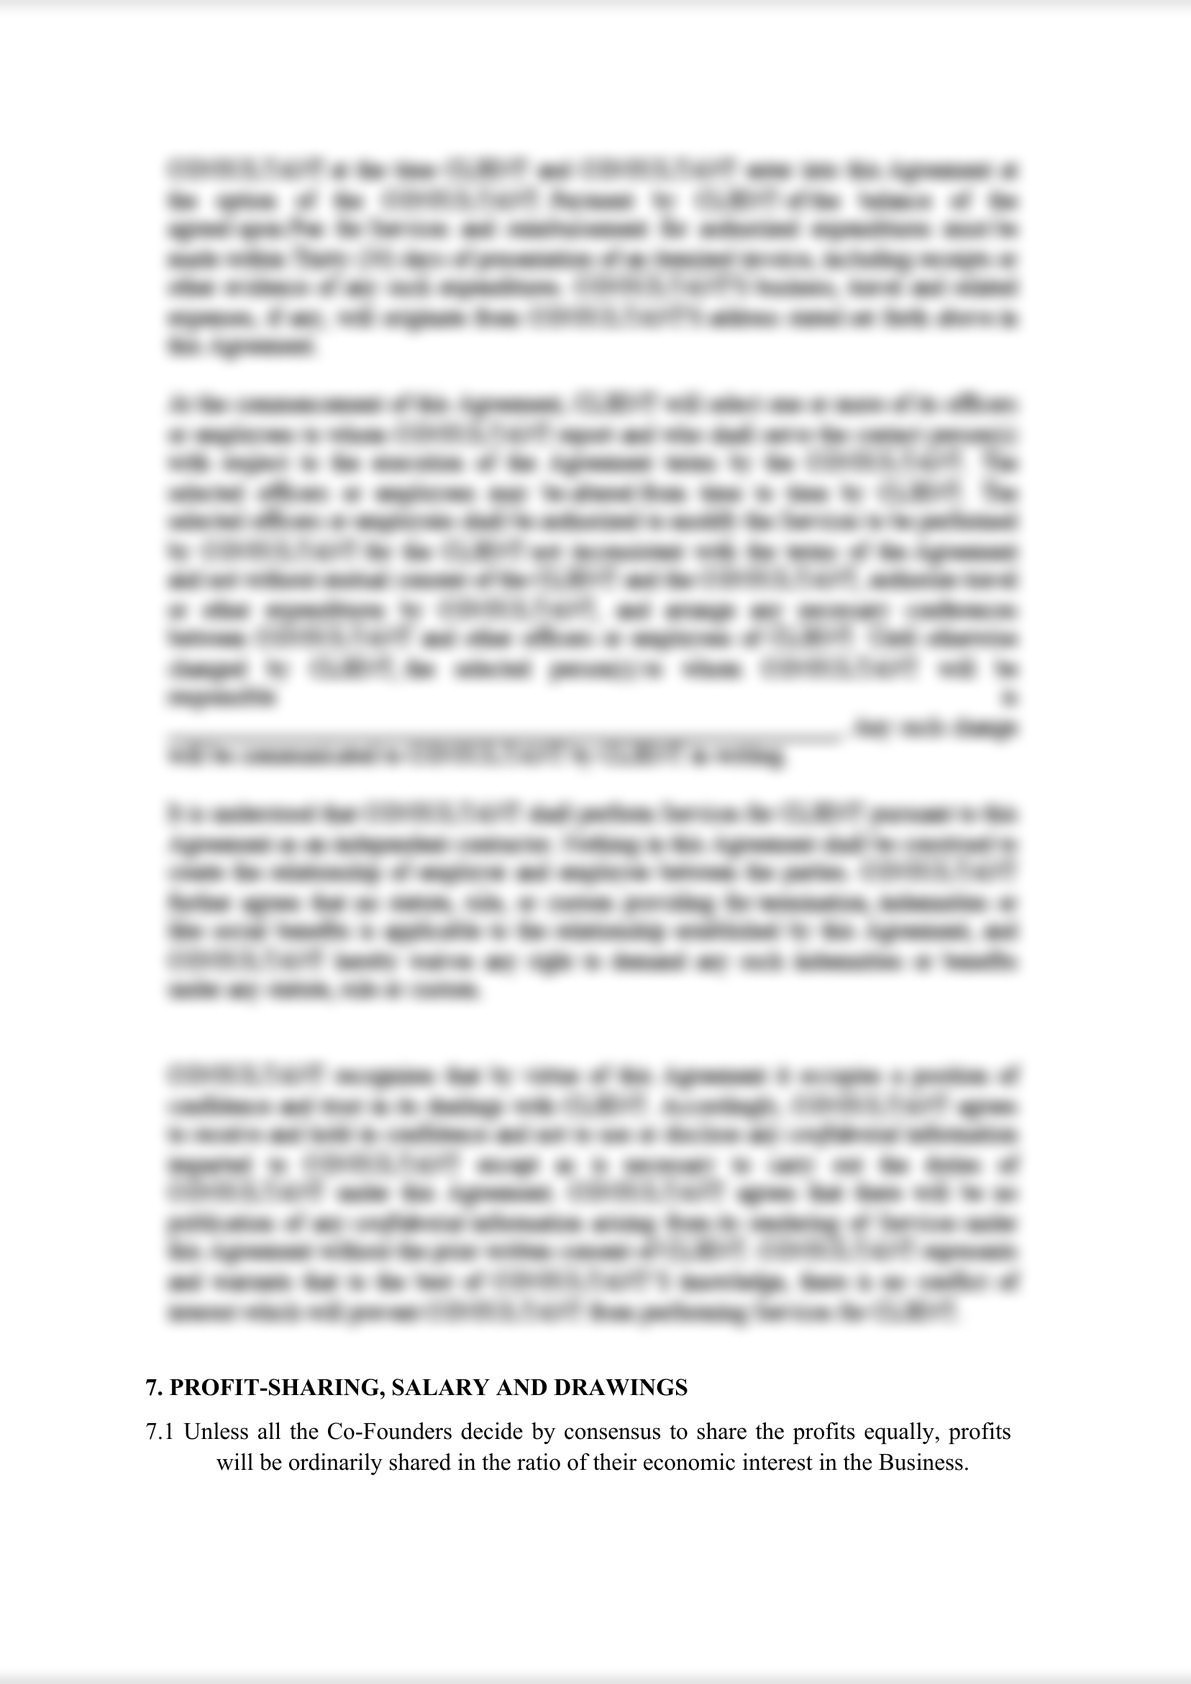 CO-FOUNDERS AGREEMENT-3